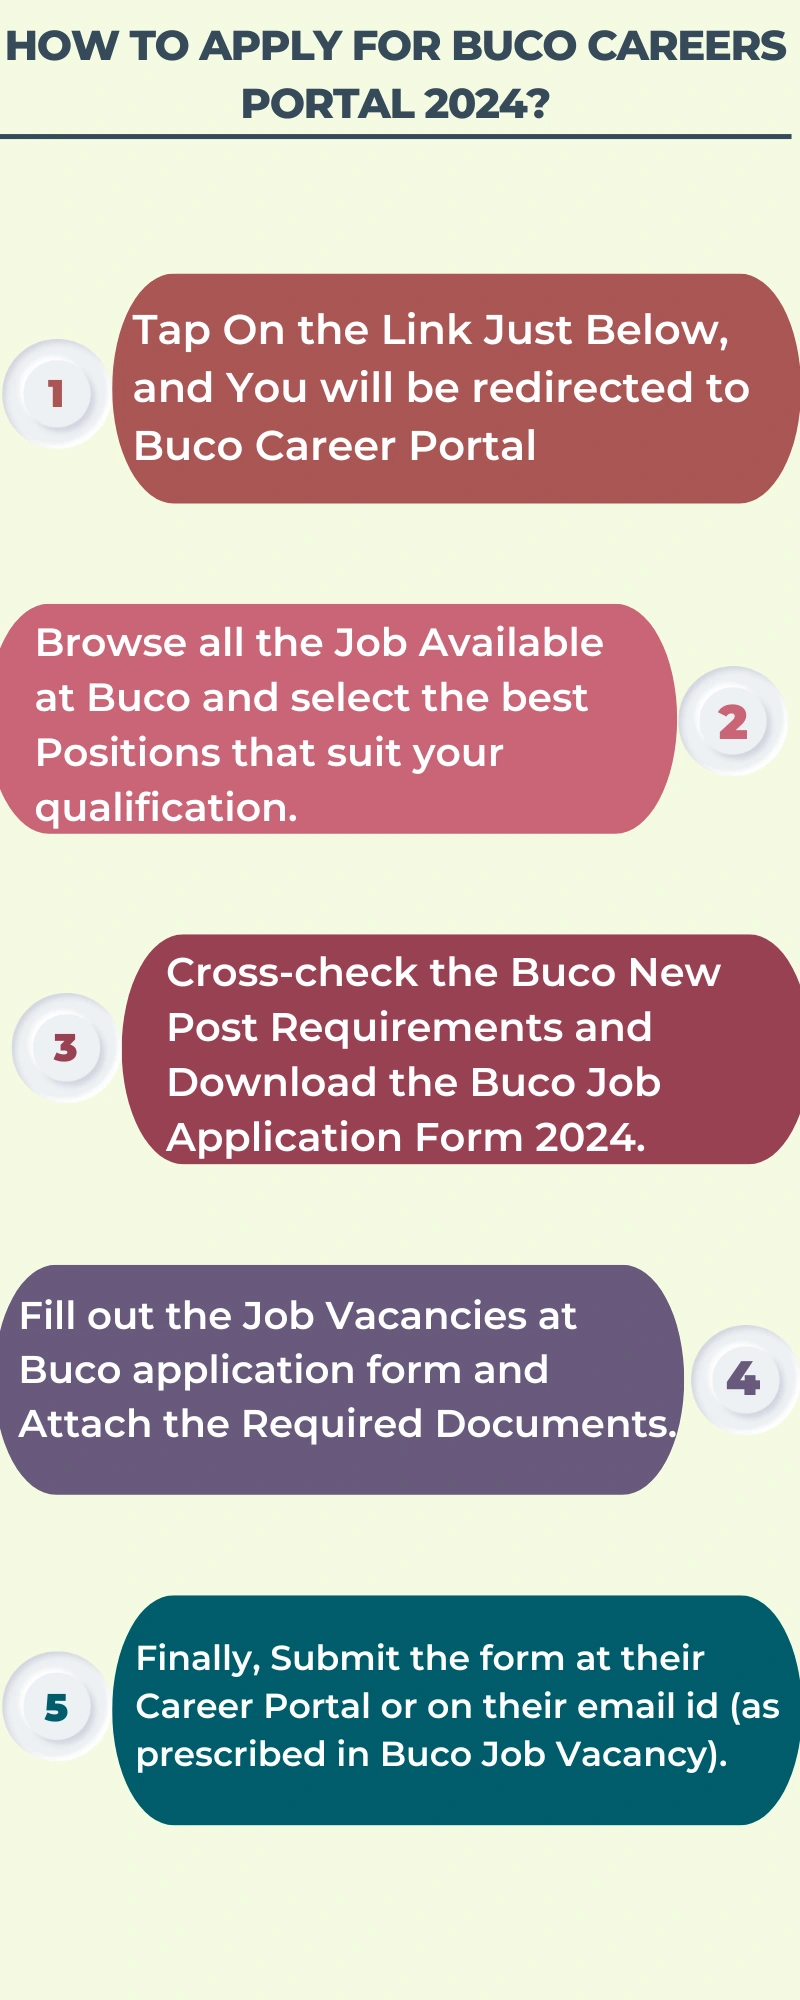 How To Apply for Buco Careers Portal 2024?